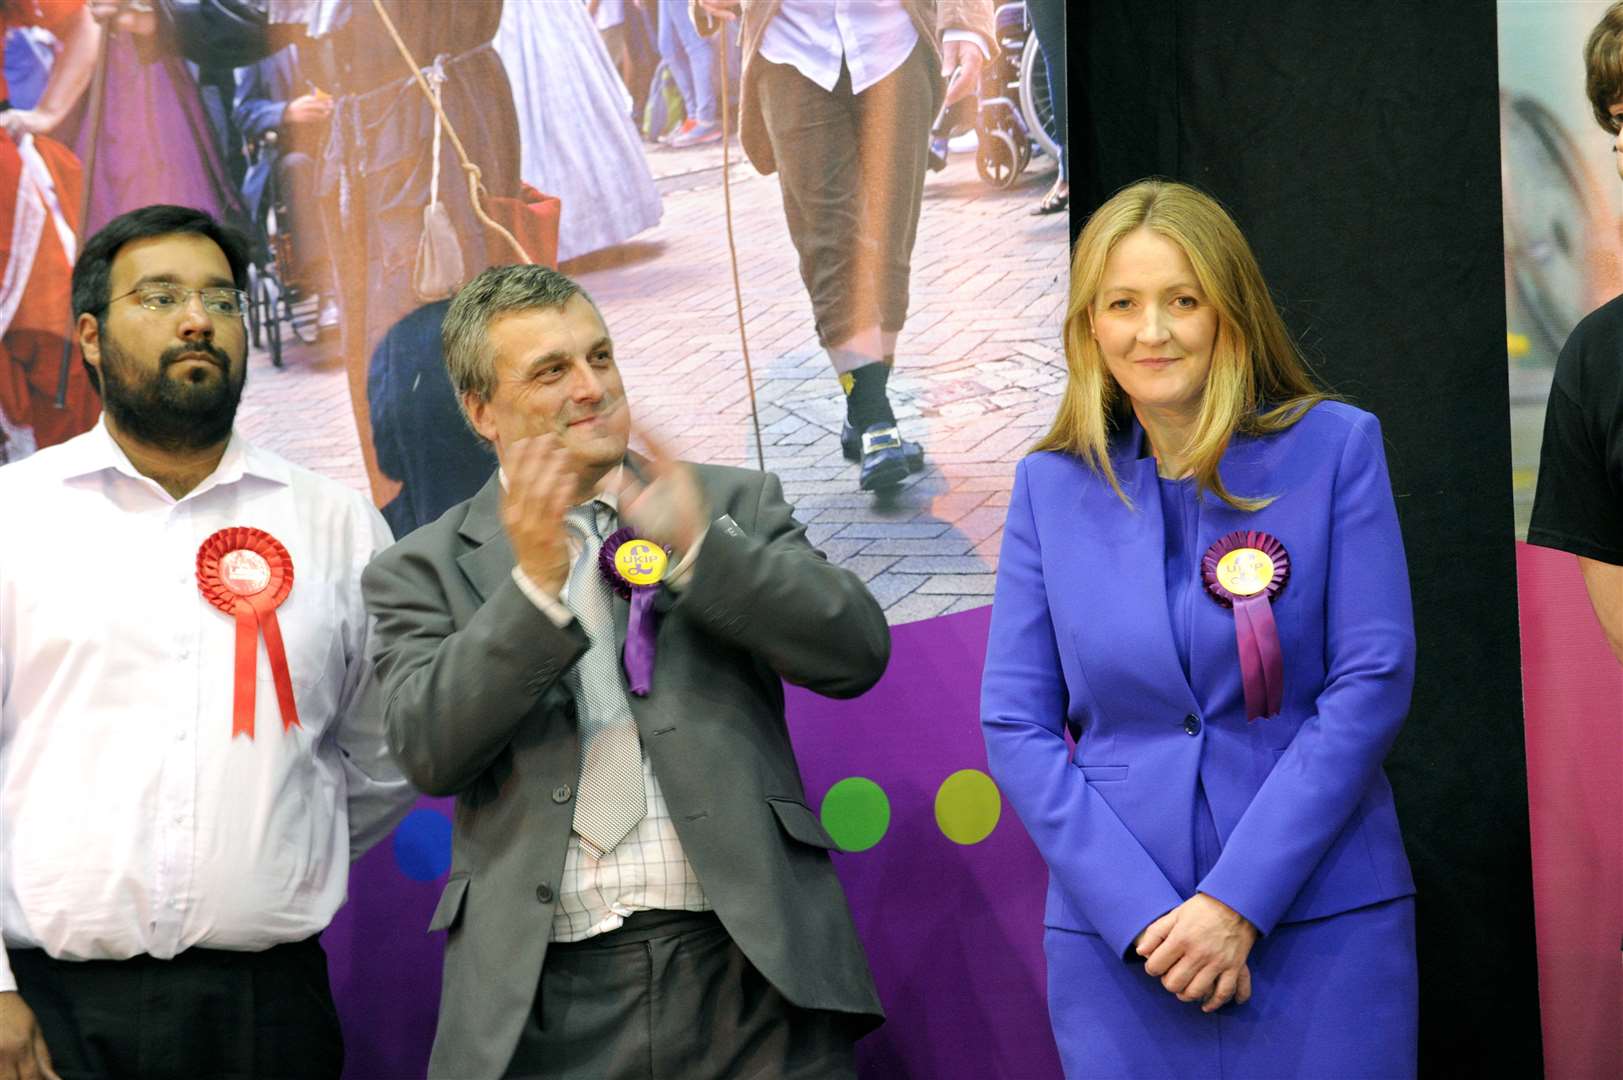 UKIP's Richard Thorne applauds at Catriona Brown-Reckless is elected for Strood South